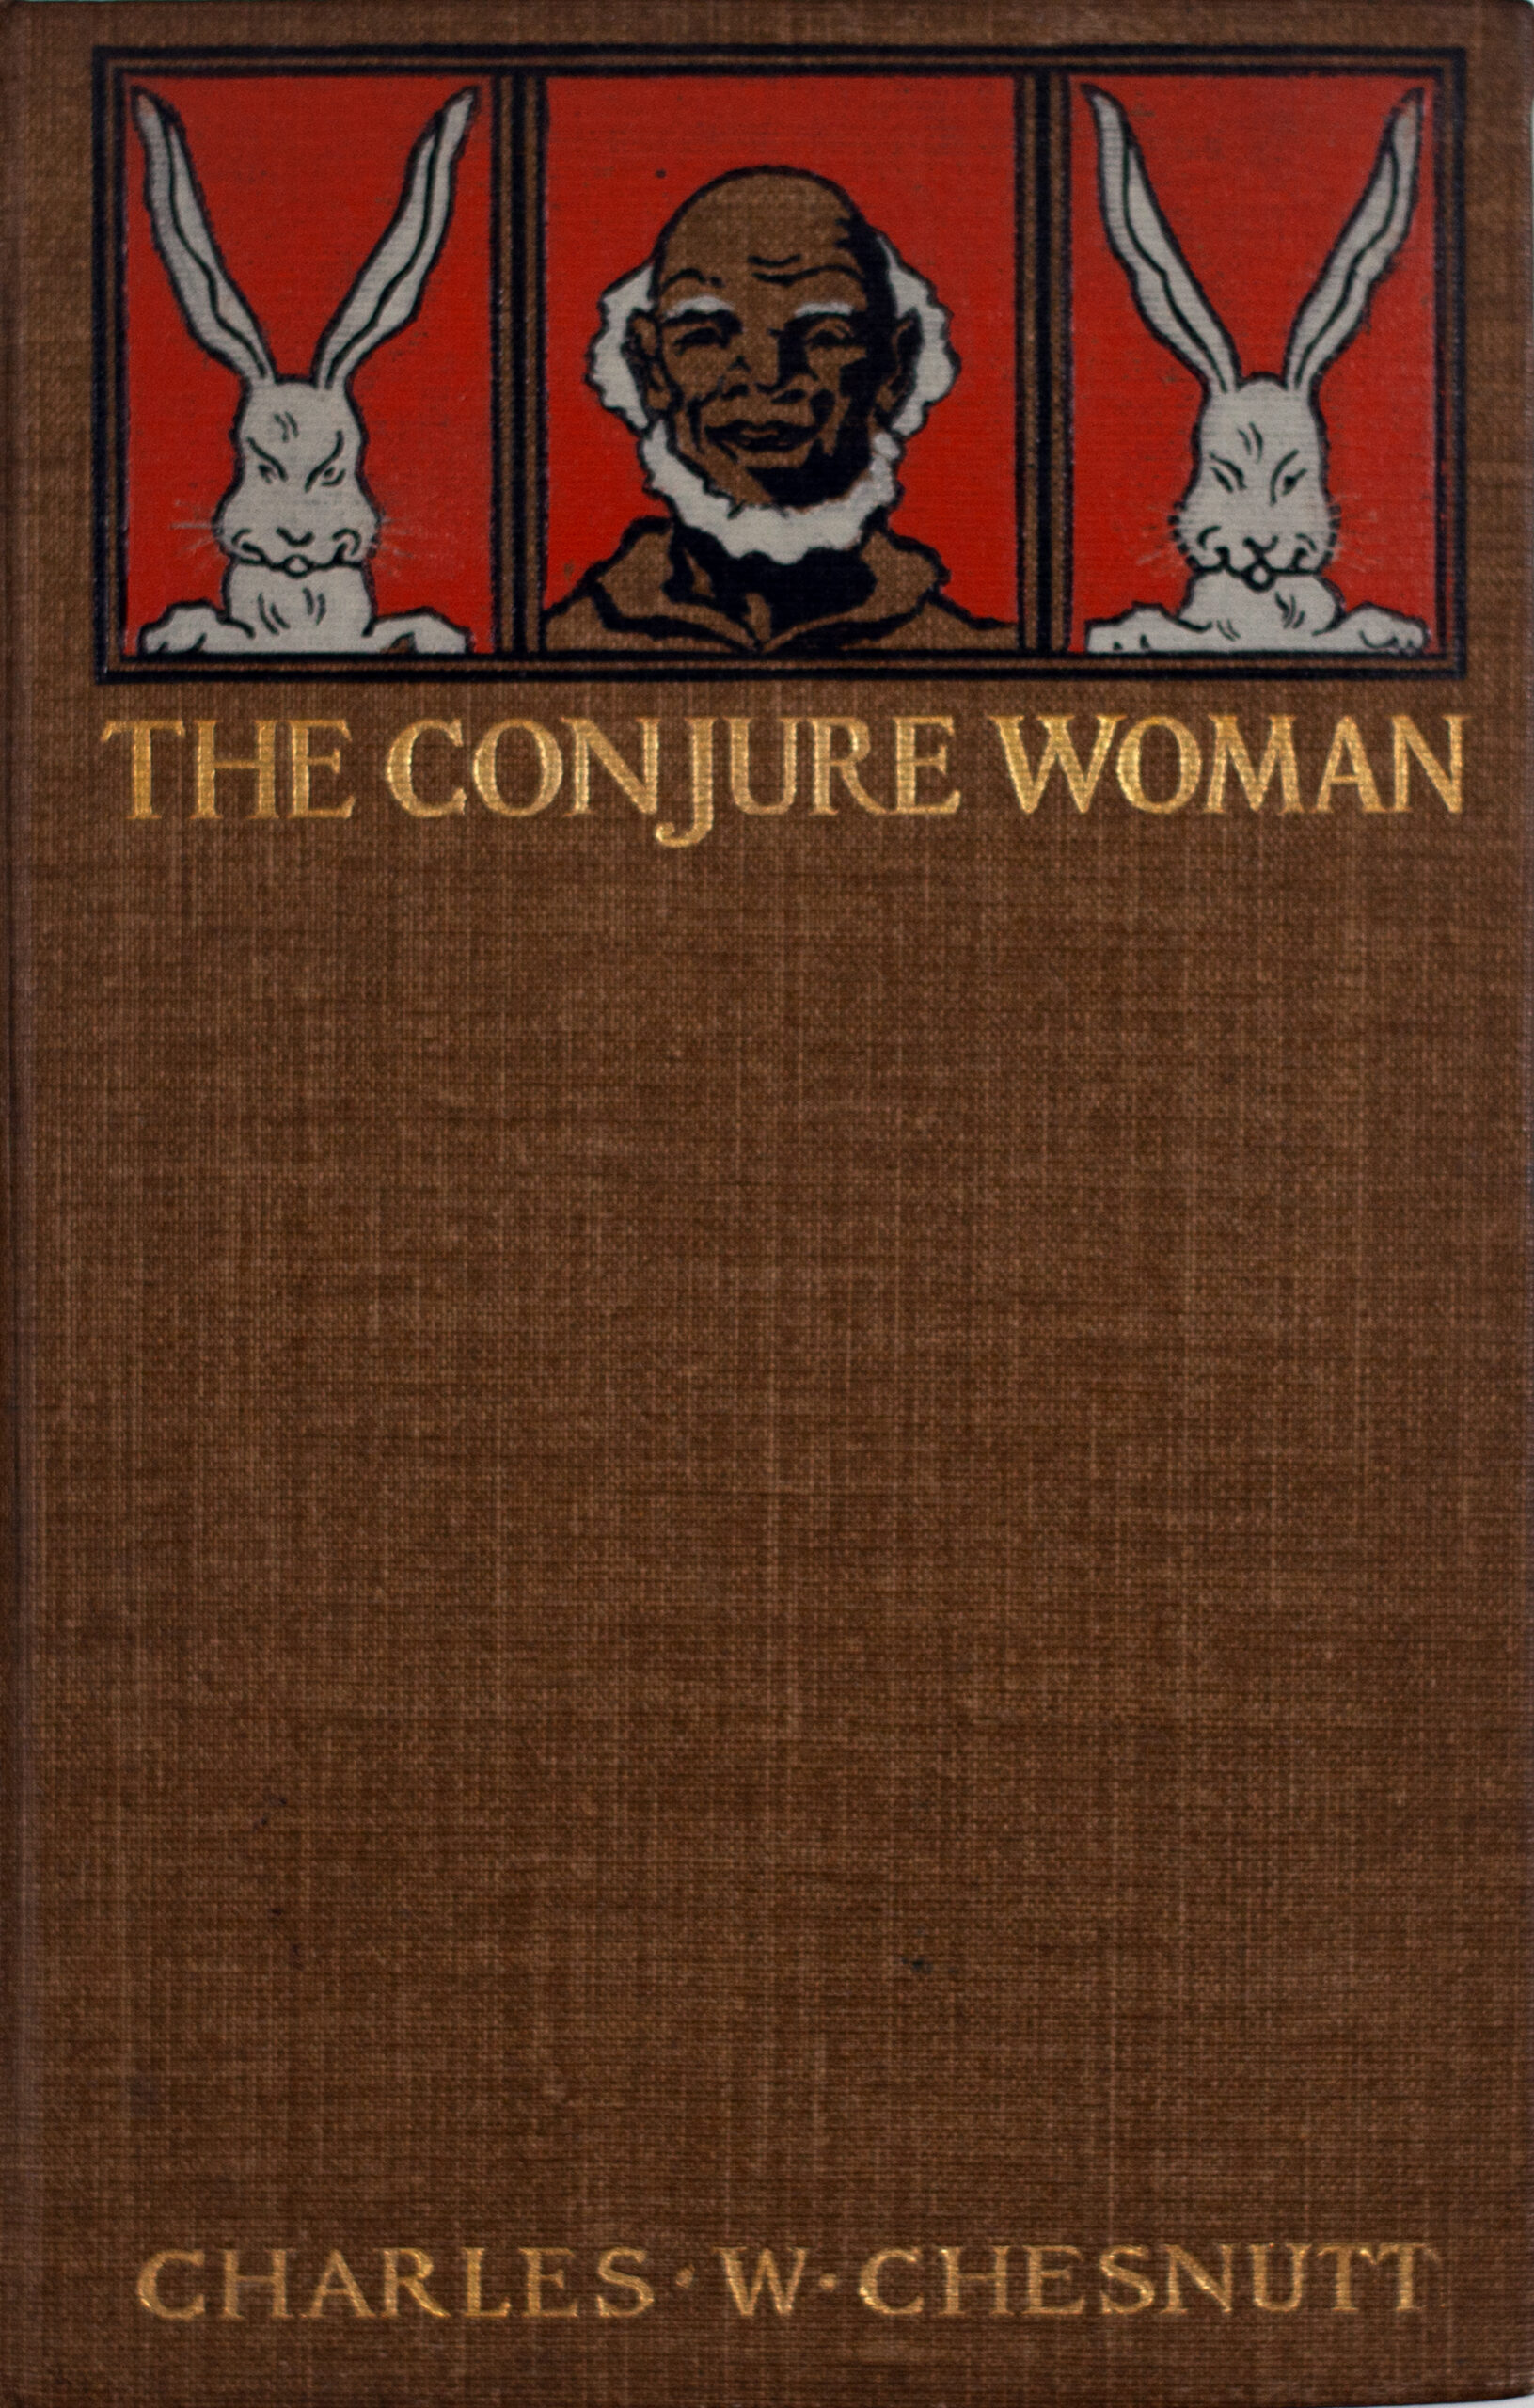 An antique book cover says The Conjure Woman by Charles W Chesnutt